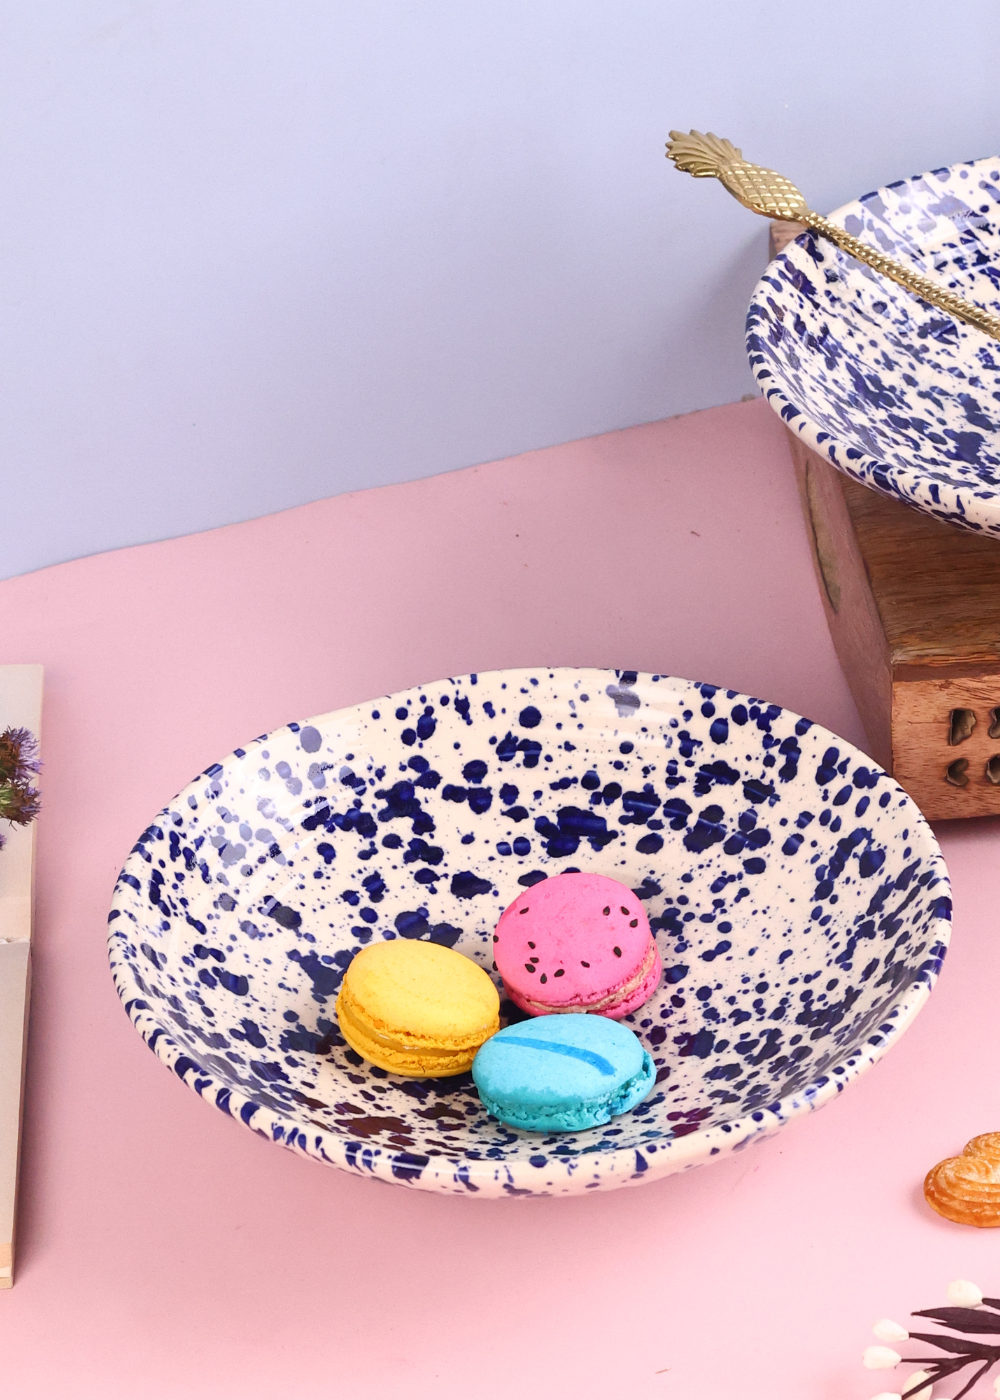 Blue flecked pasta bowl with macarons